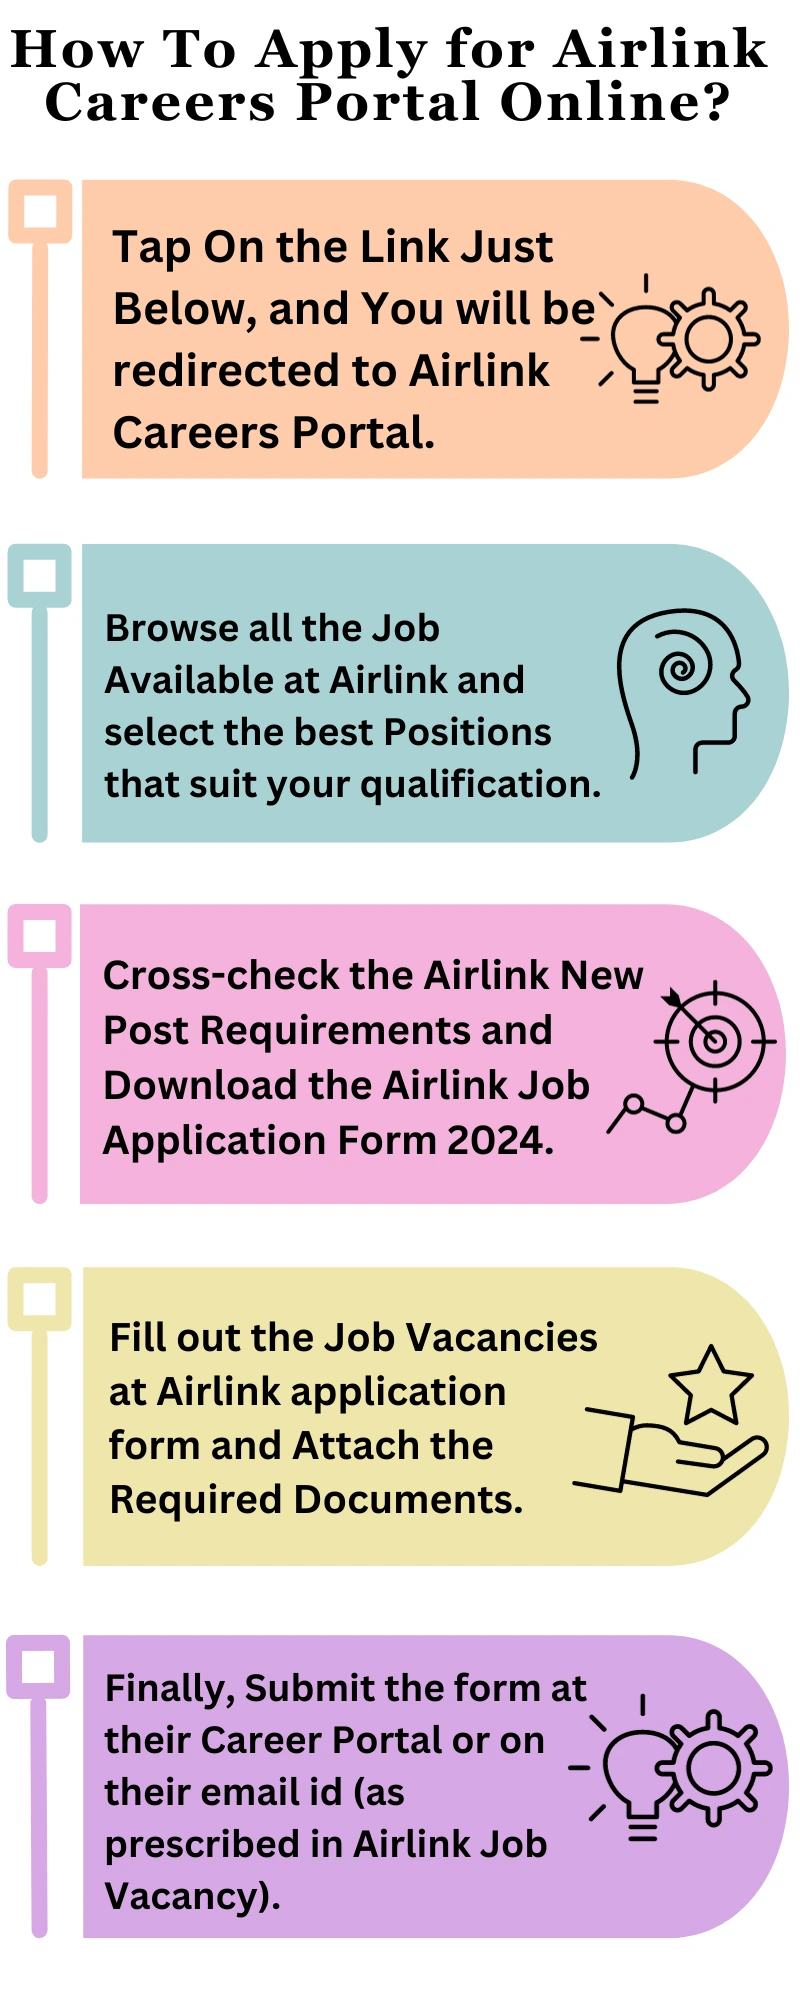 How To Apply for Airlink Careers Portal Online